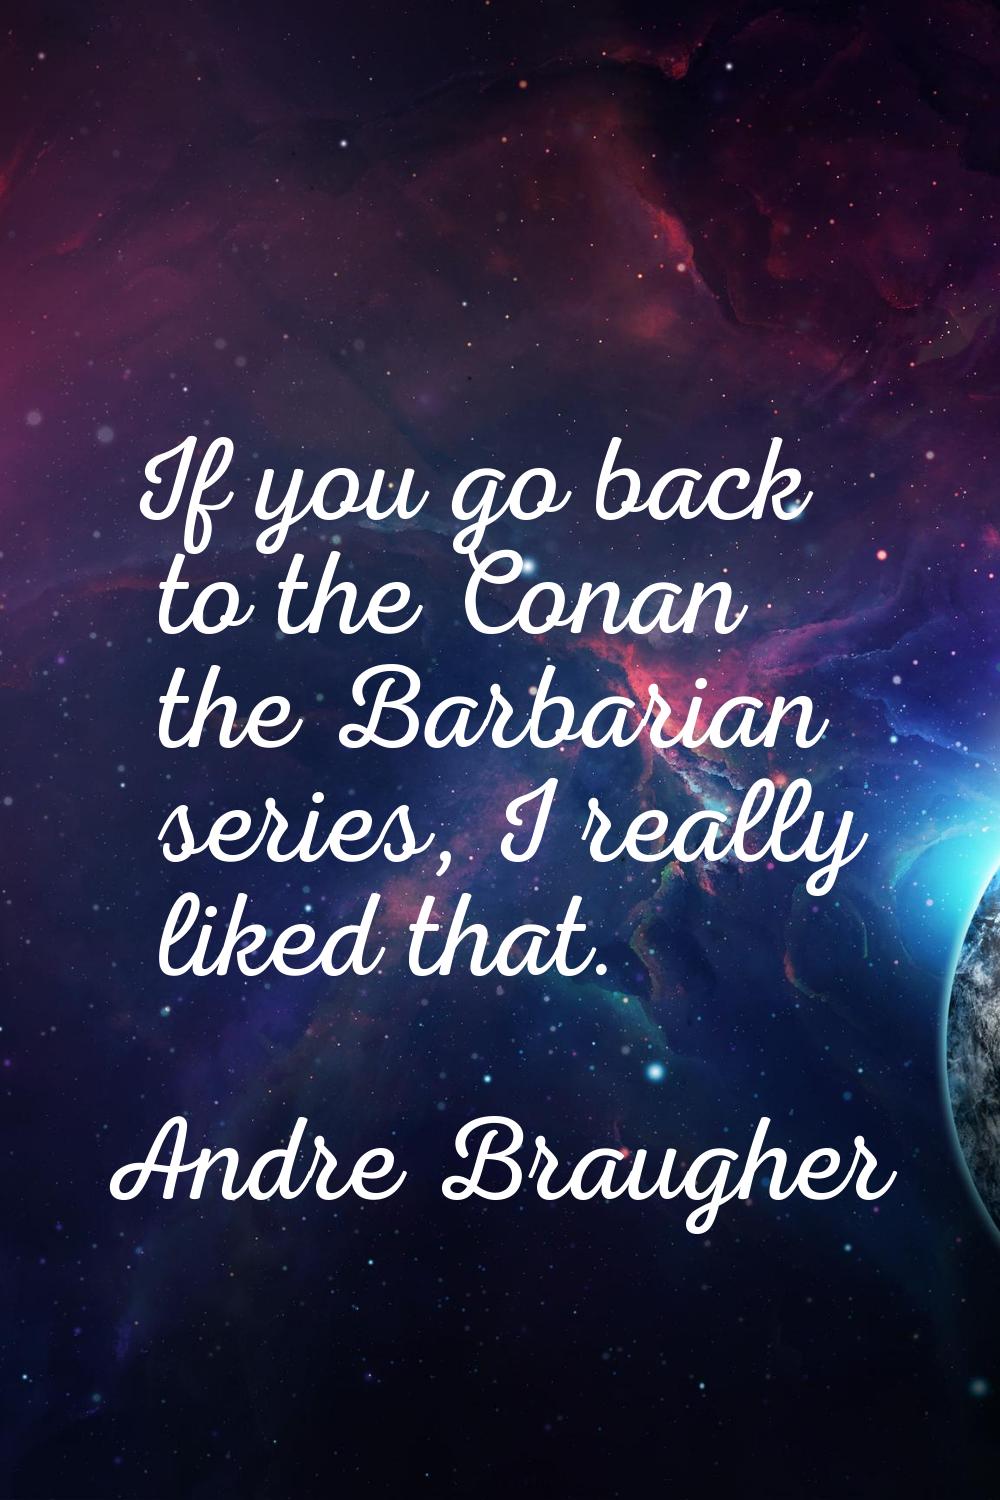 If you go back to the Conan the Barbarian series, I really liked that.